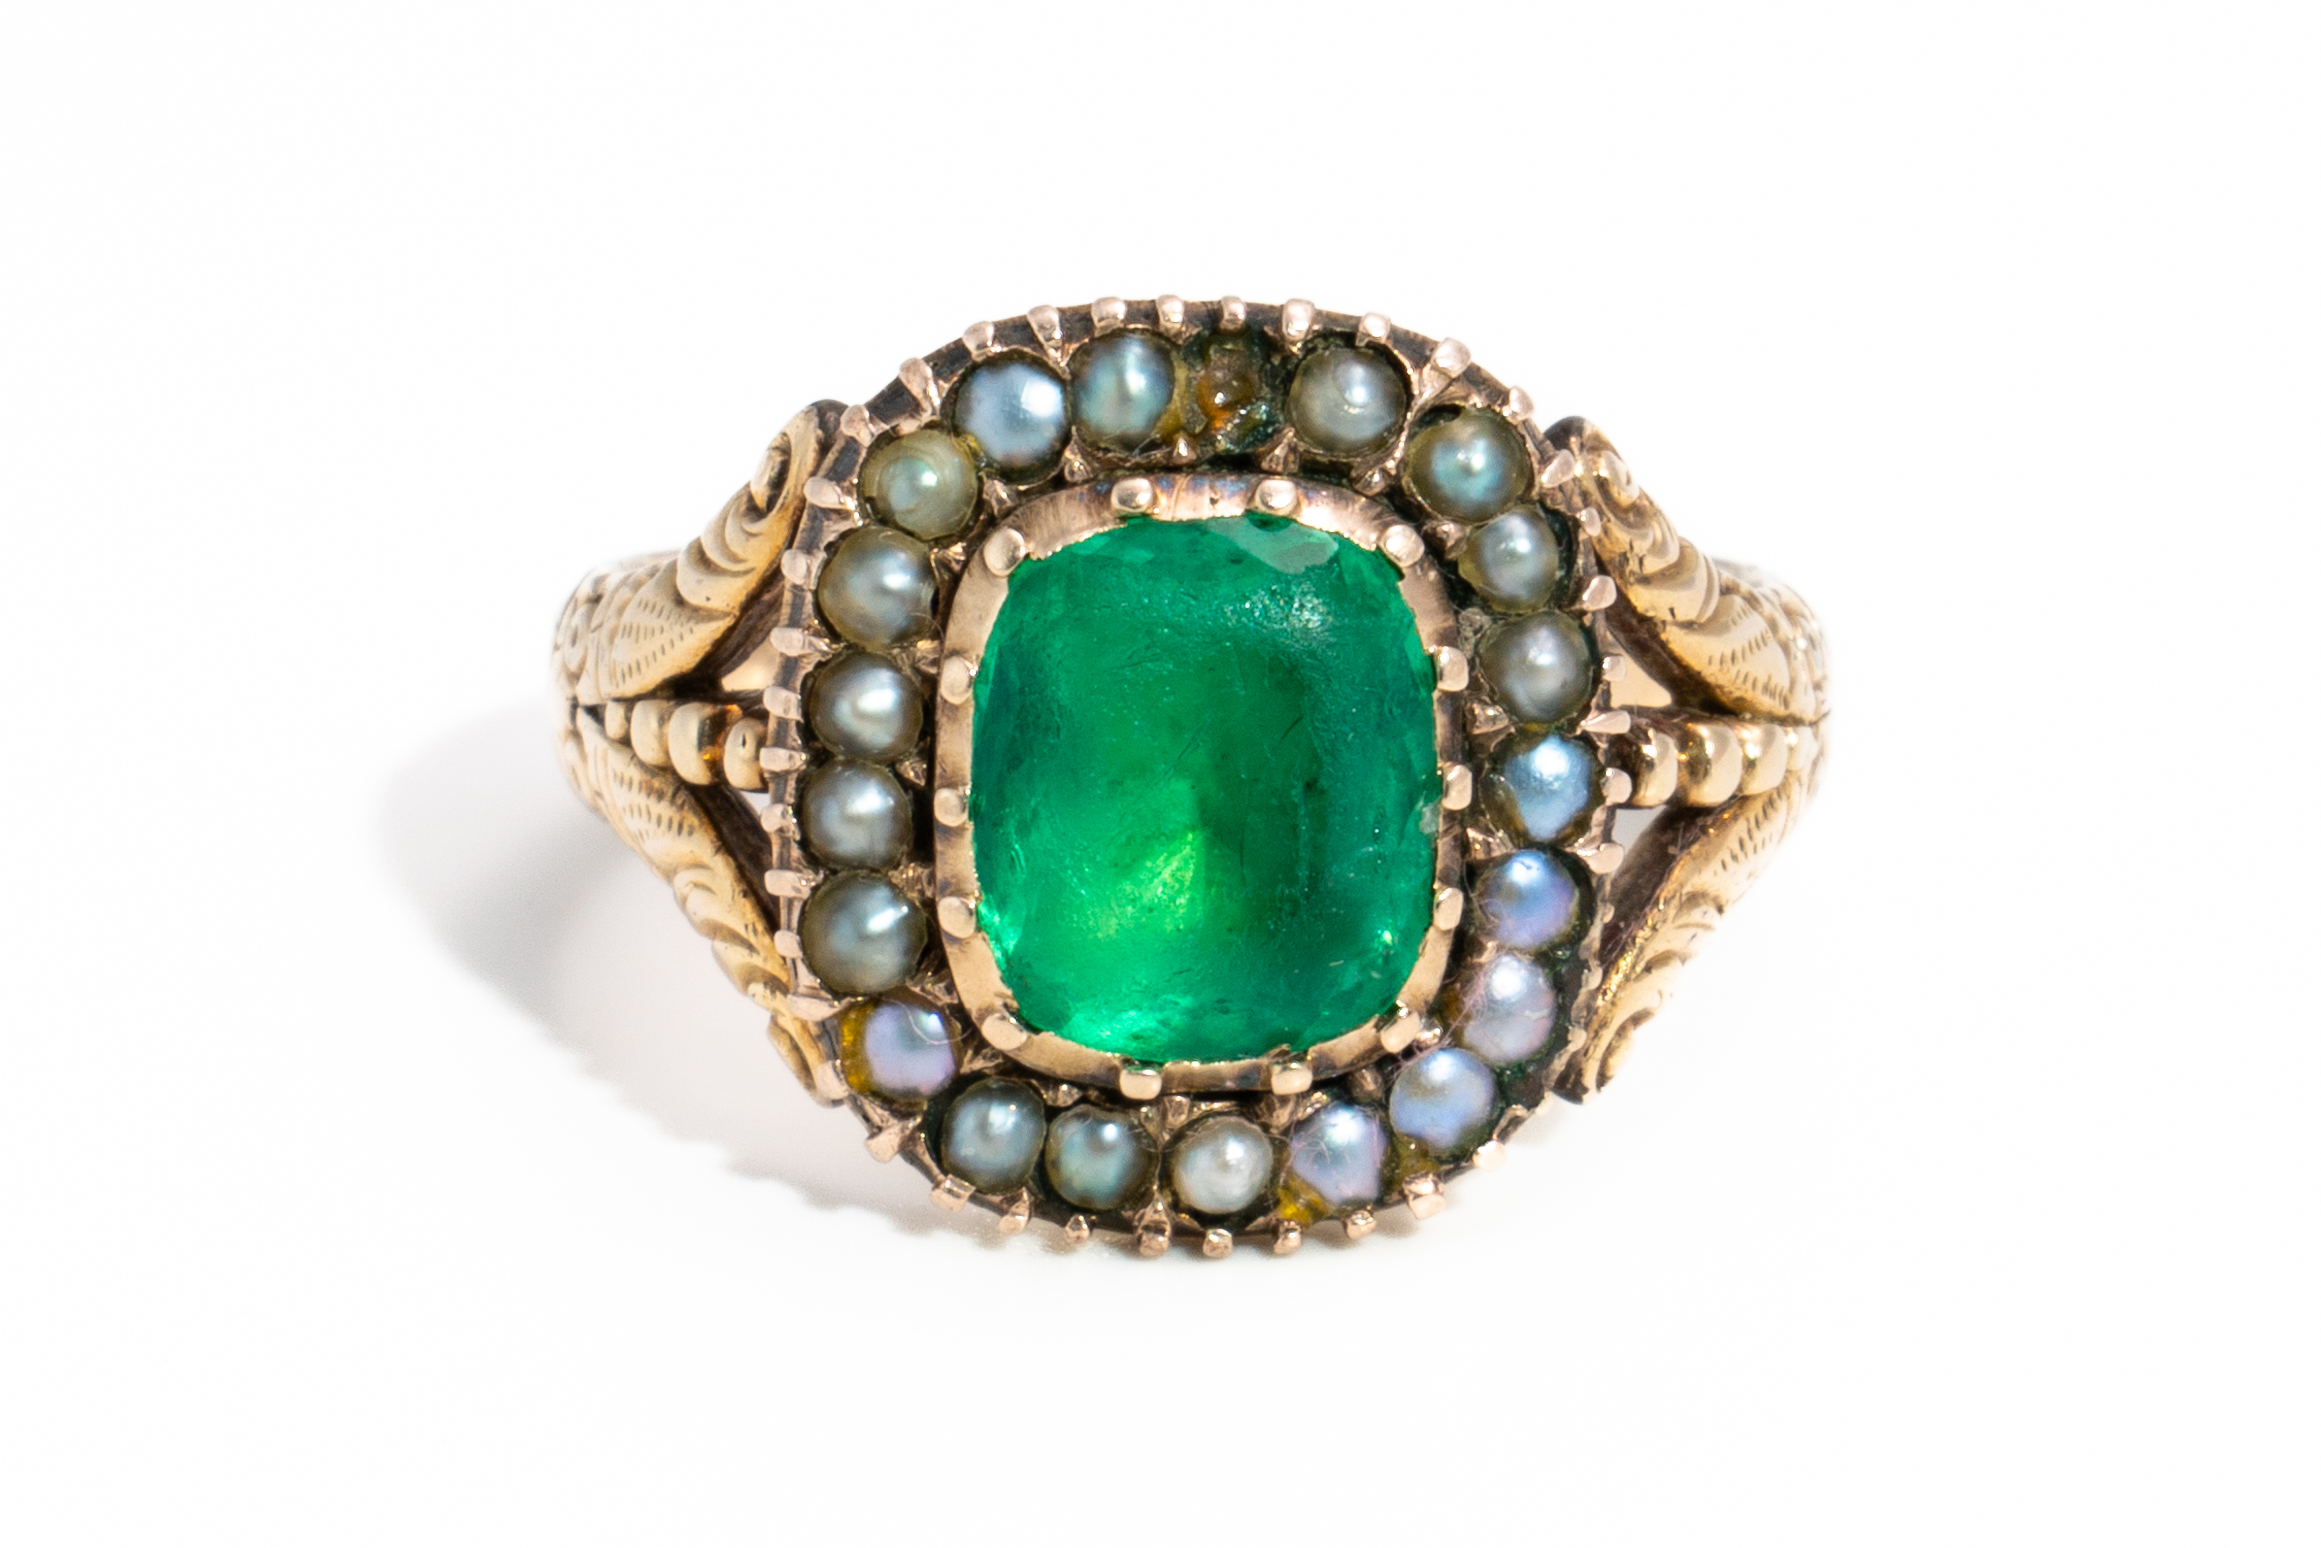 A GEORGIAN GOLD, GREEN PASTE AND SEED PEARL RING